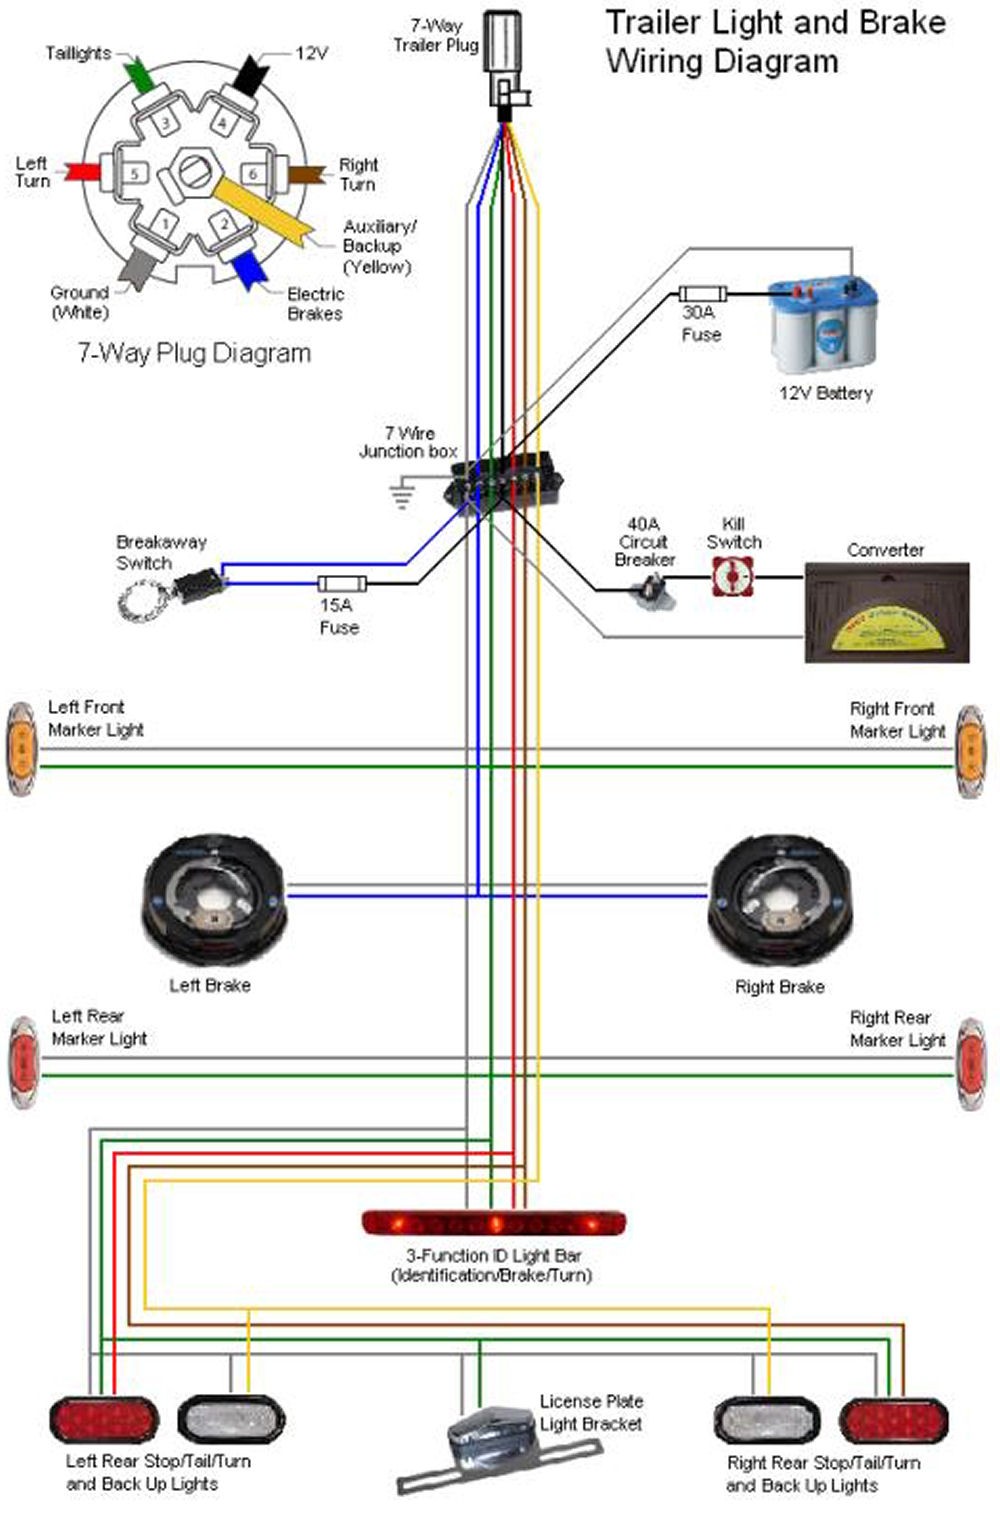 New 7Way Trailer Wiring Diagram 21 About Remodel The12volt Inside 7 Way